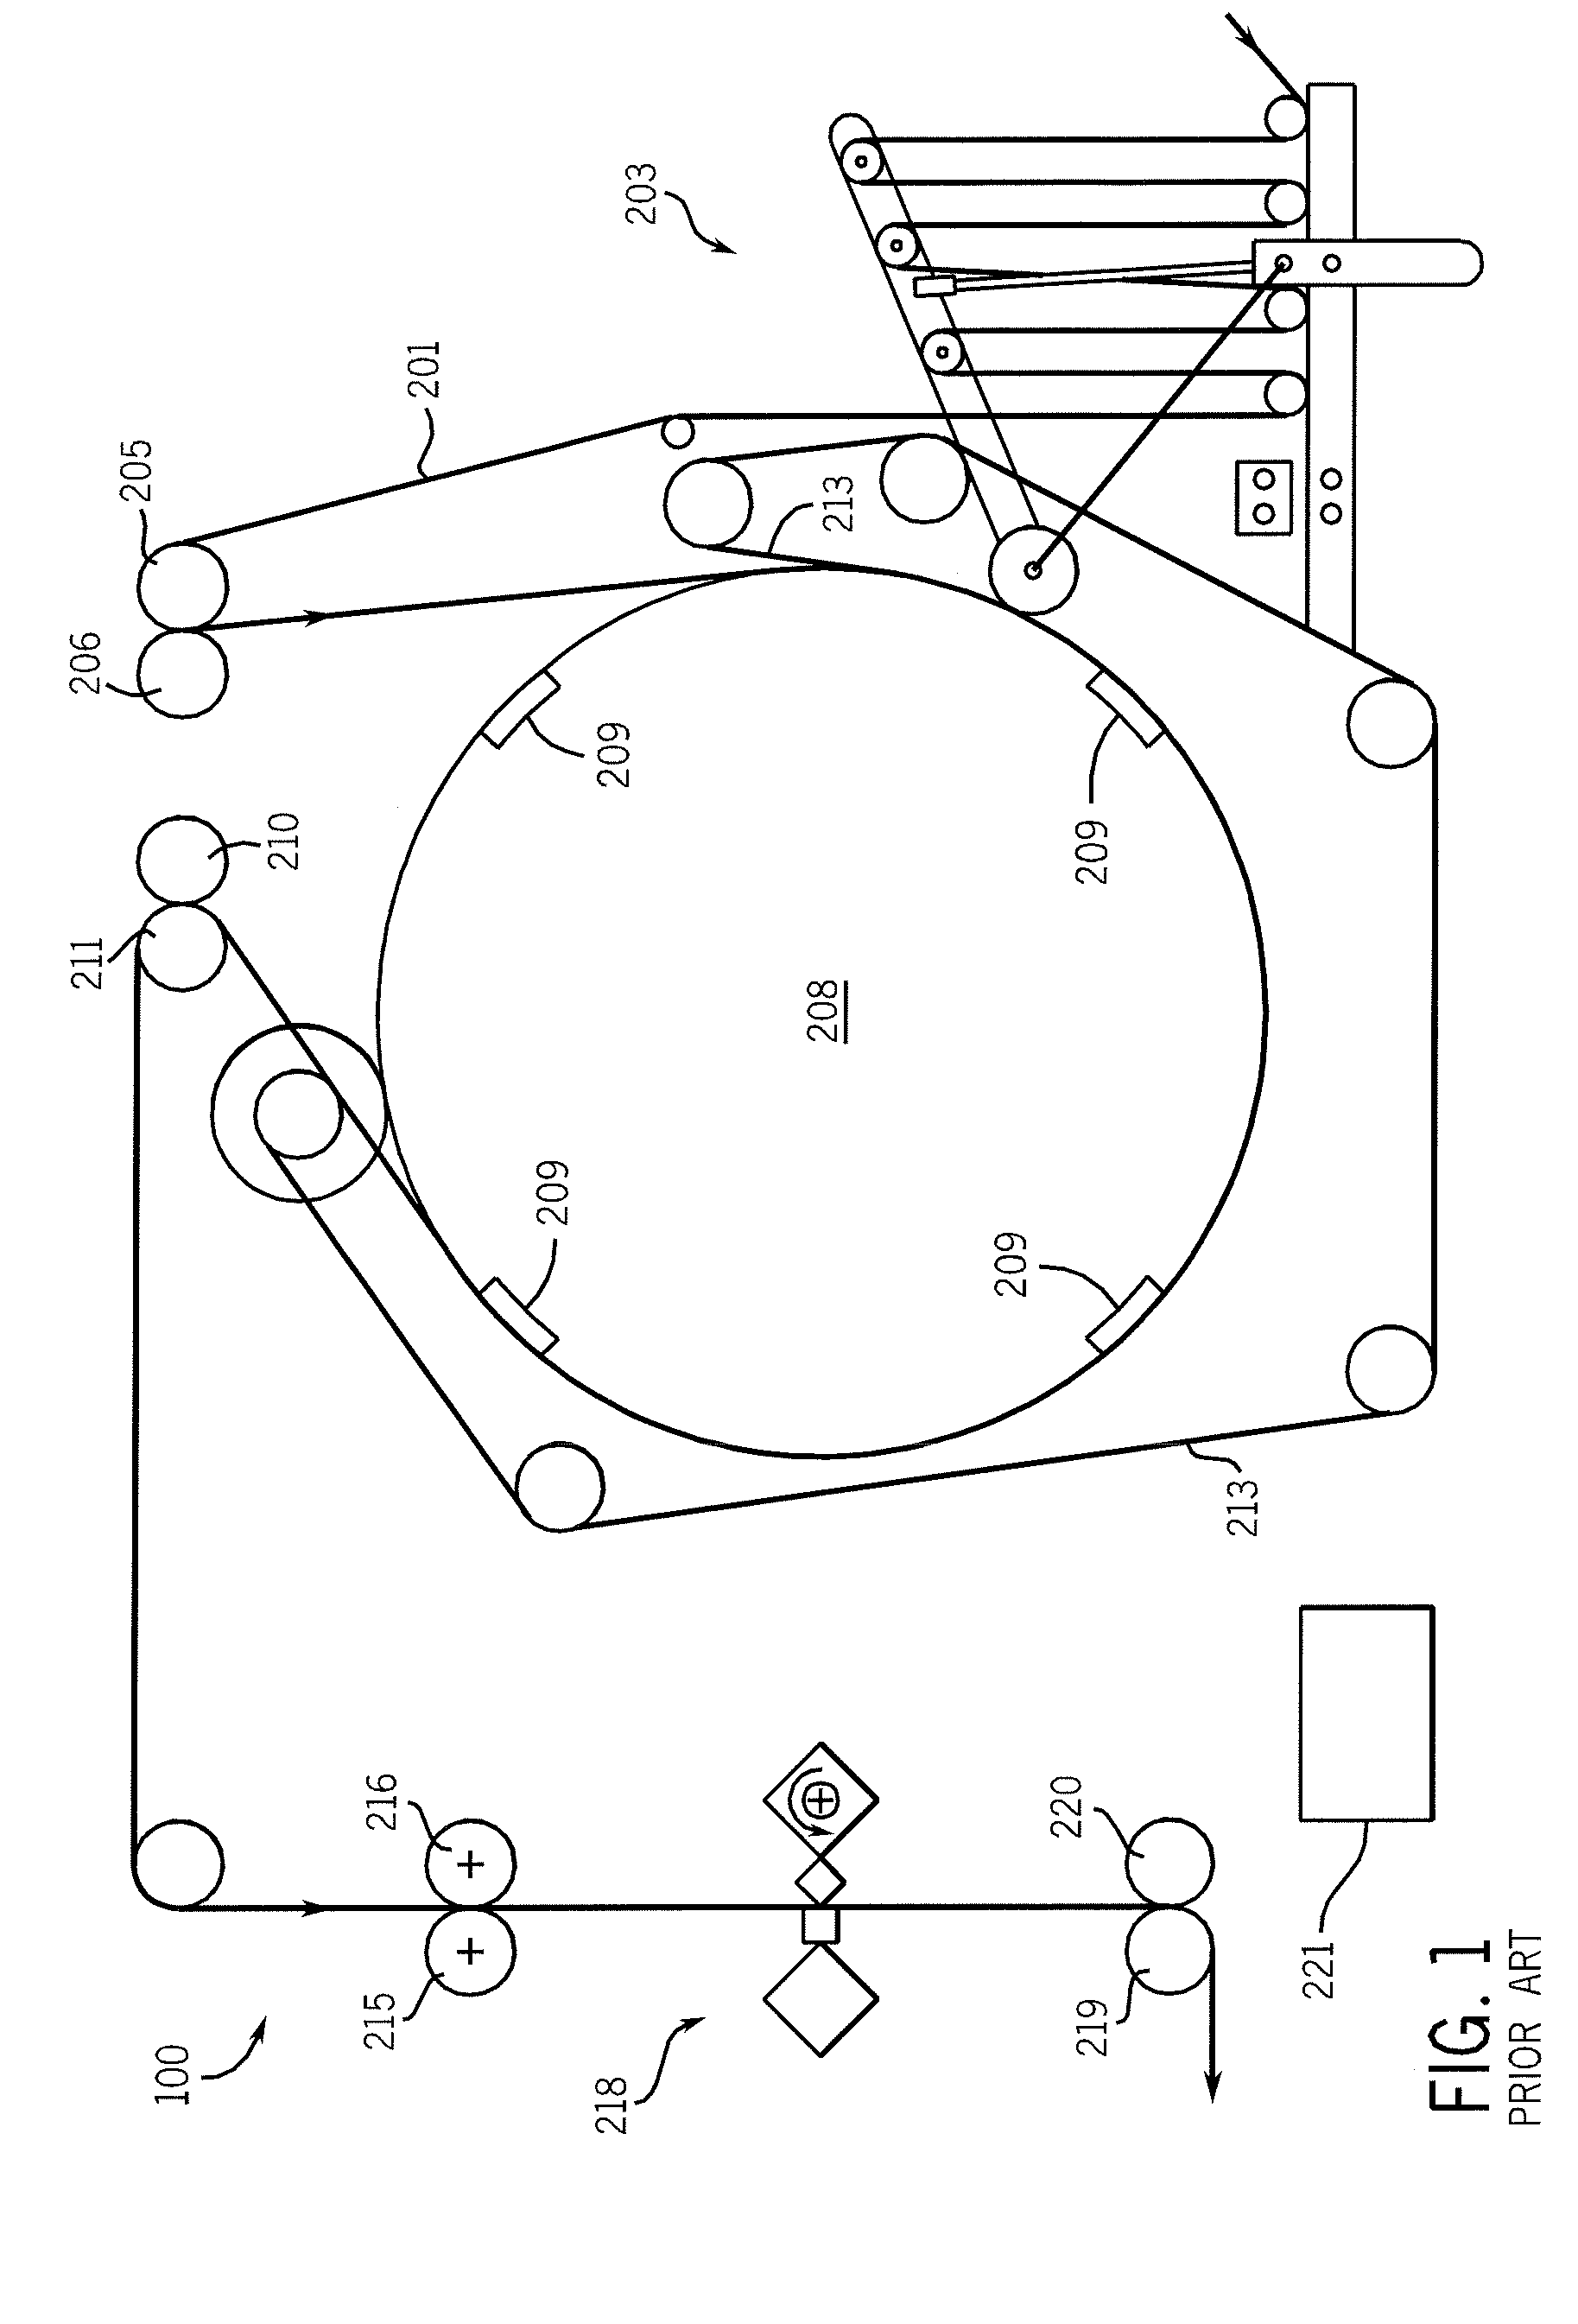 Method and apparatus for making bags